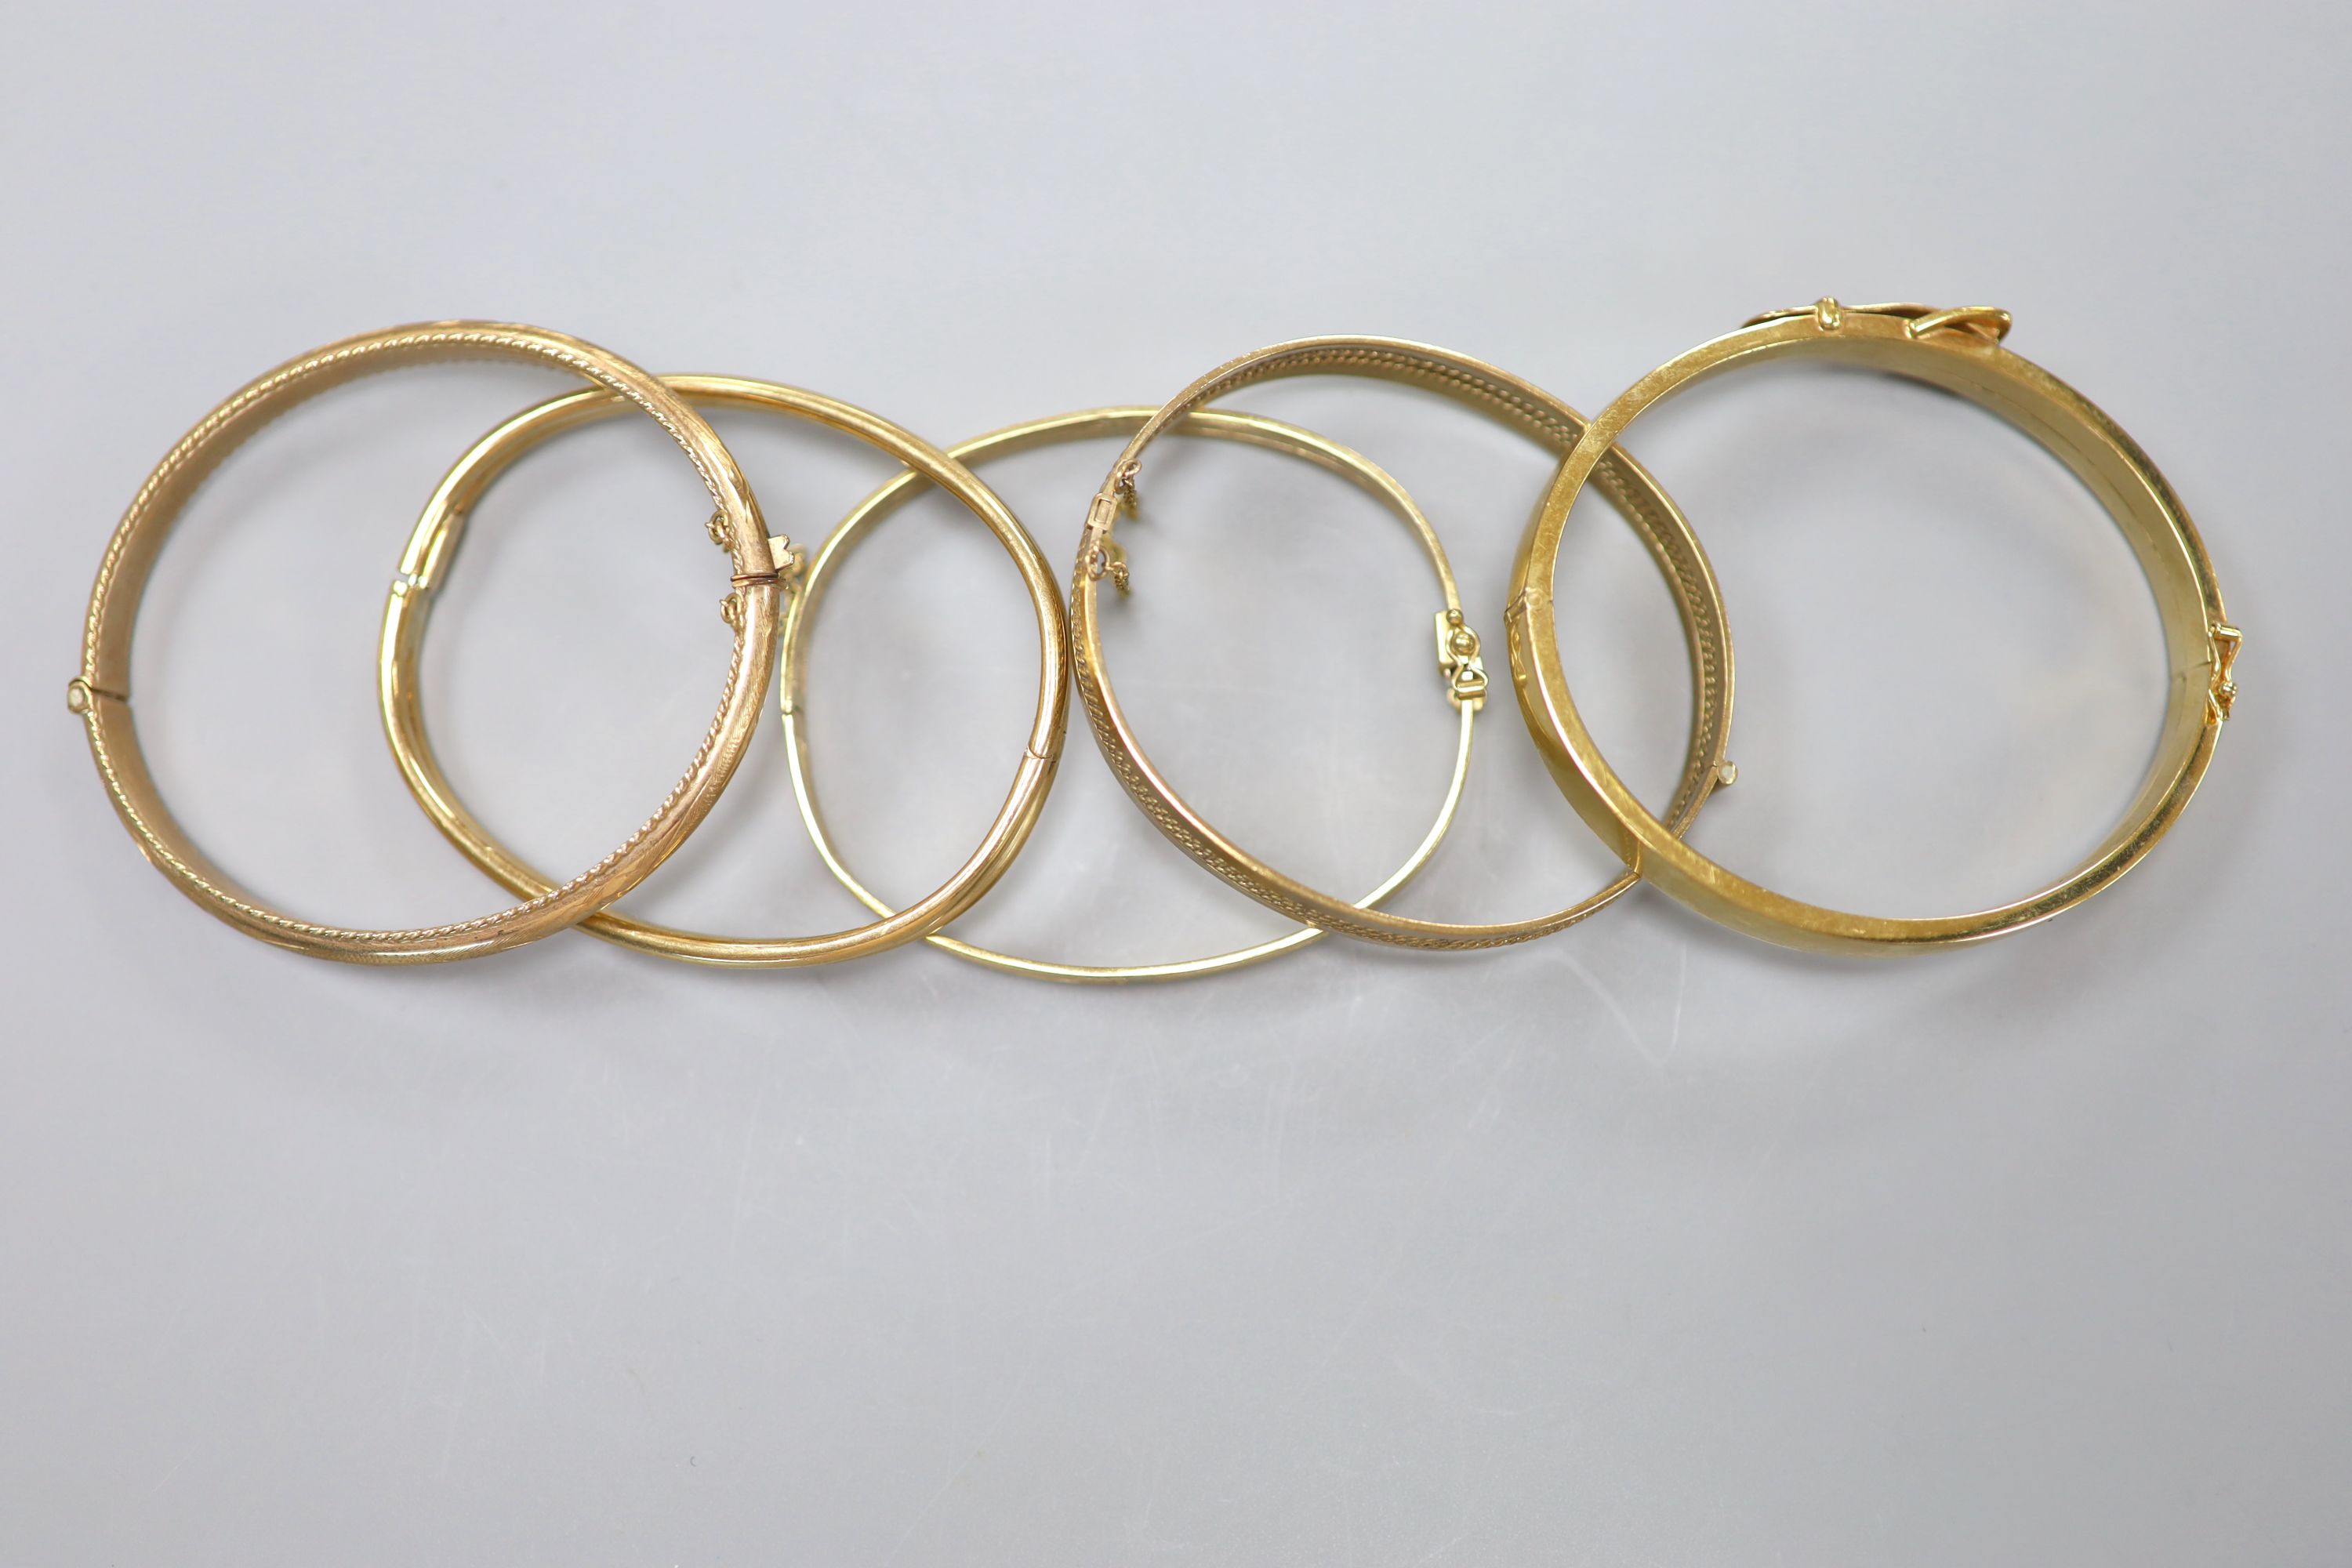 Five assorted modern 9ct gold hinged bangles